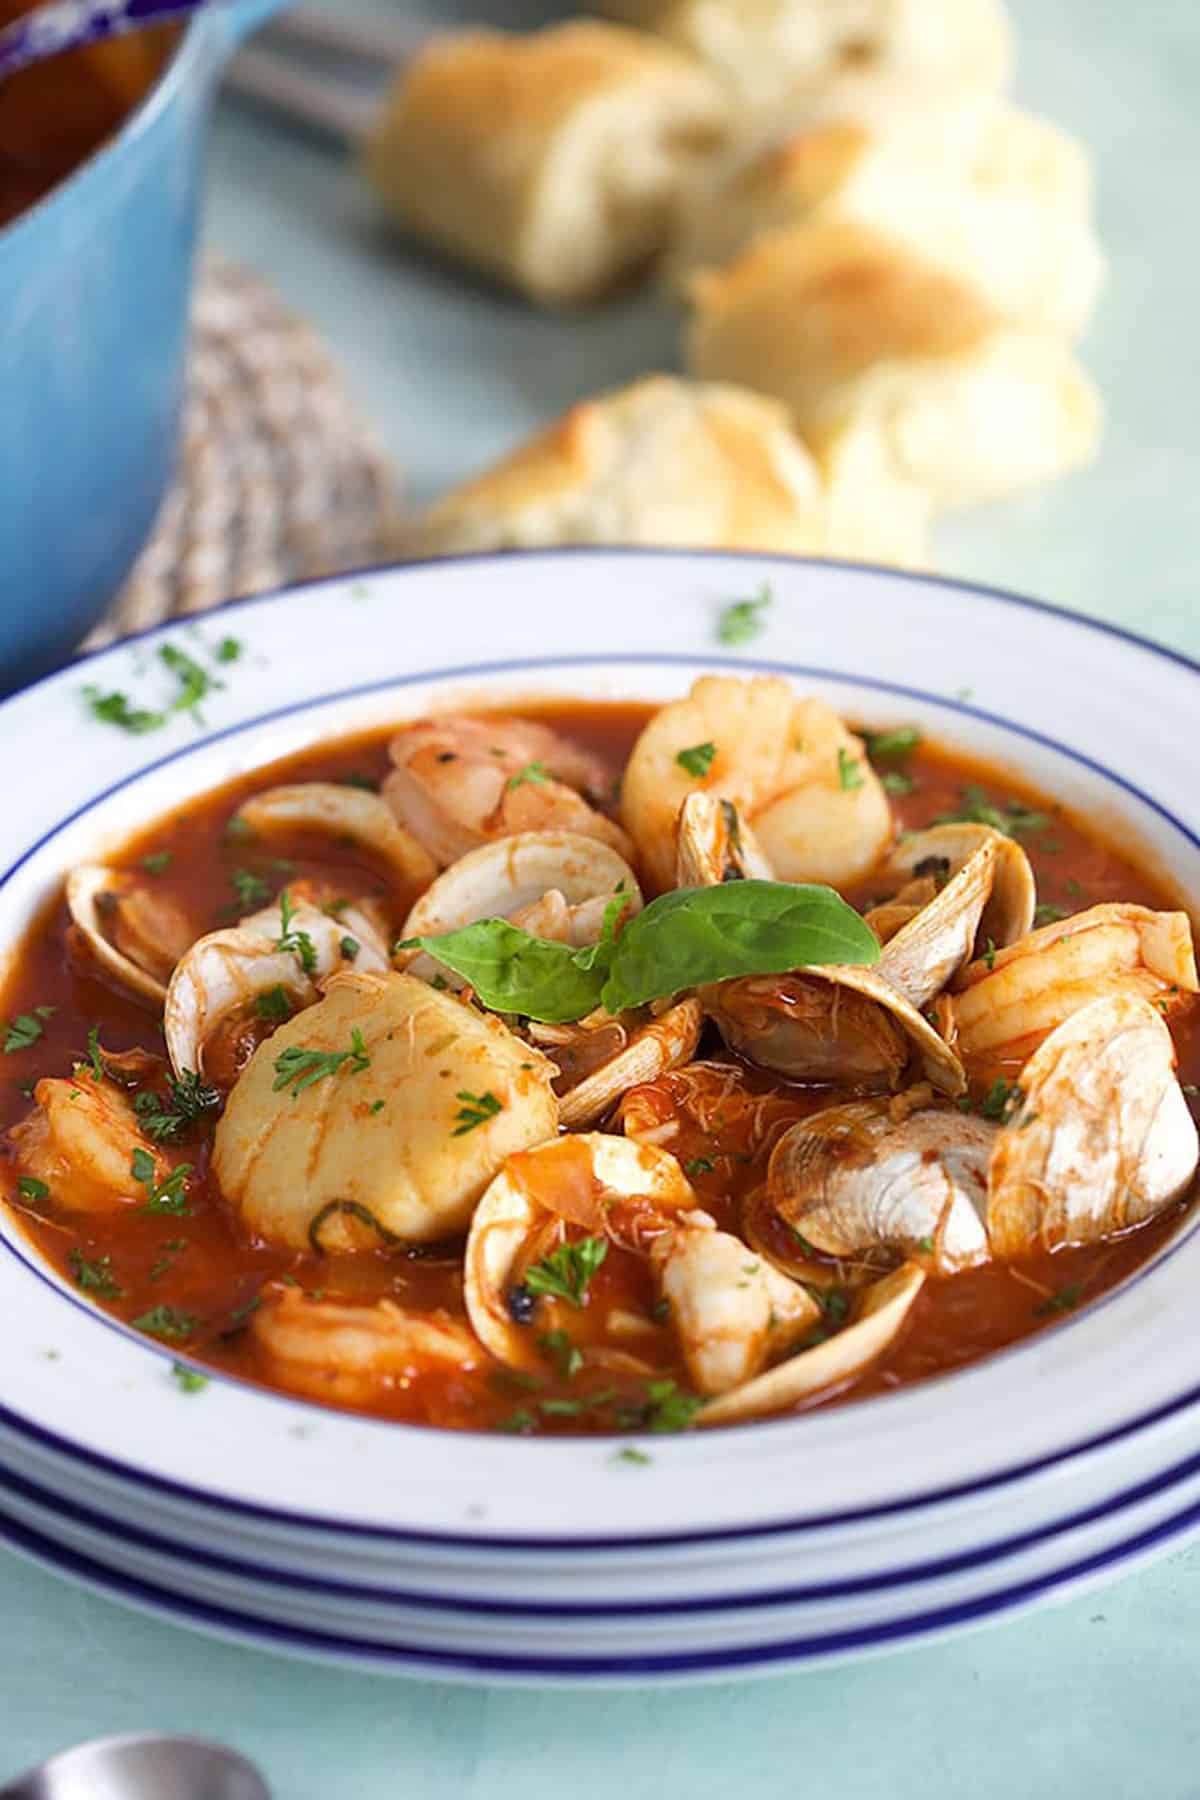 Stacked bowls with the top bowl filled with cioppino with crusty bread in the background.